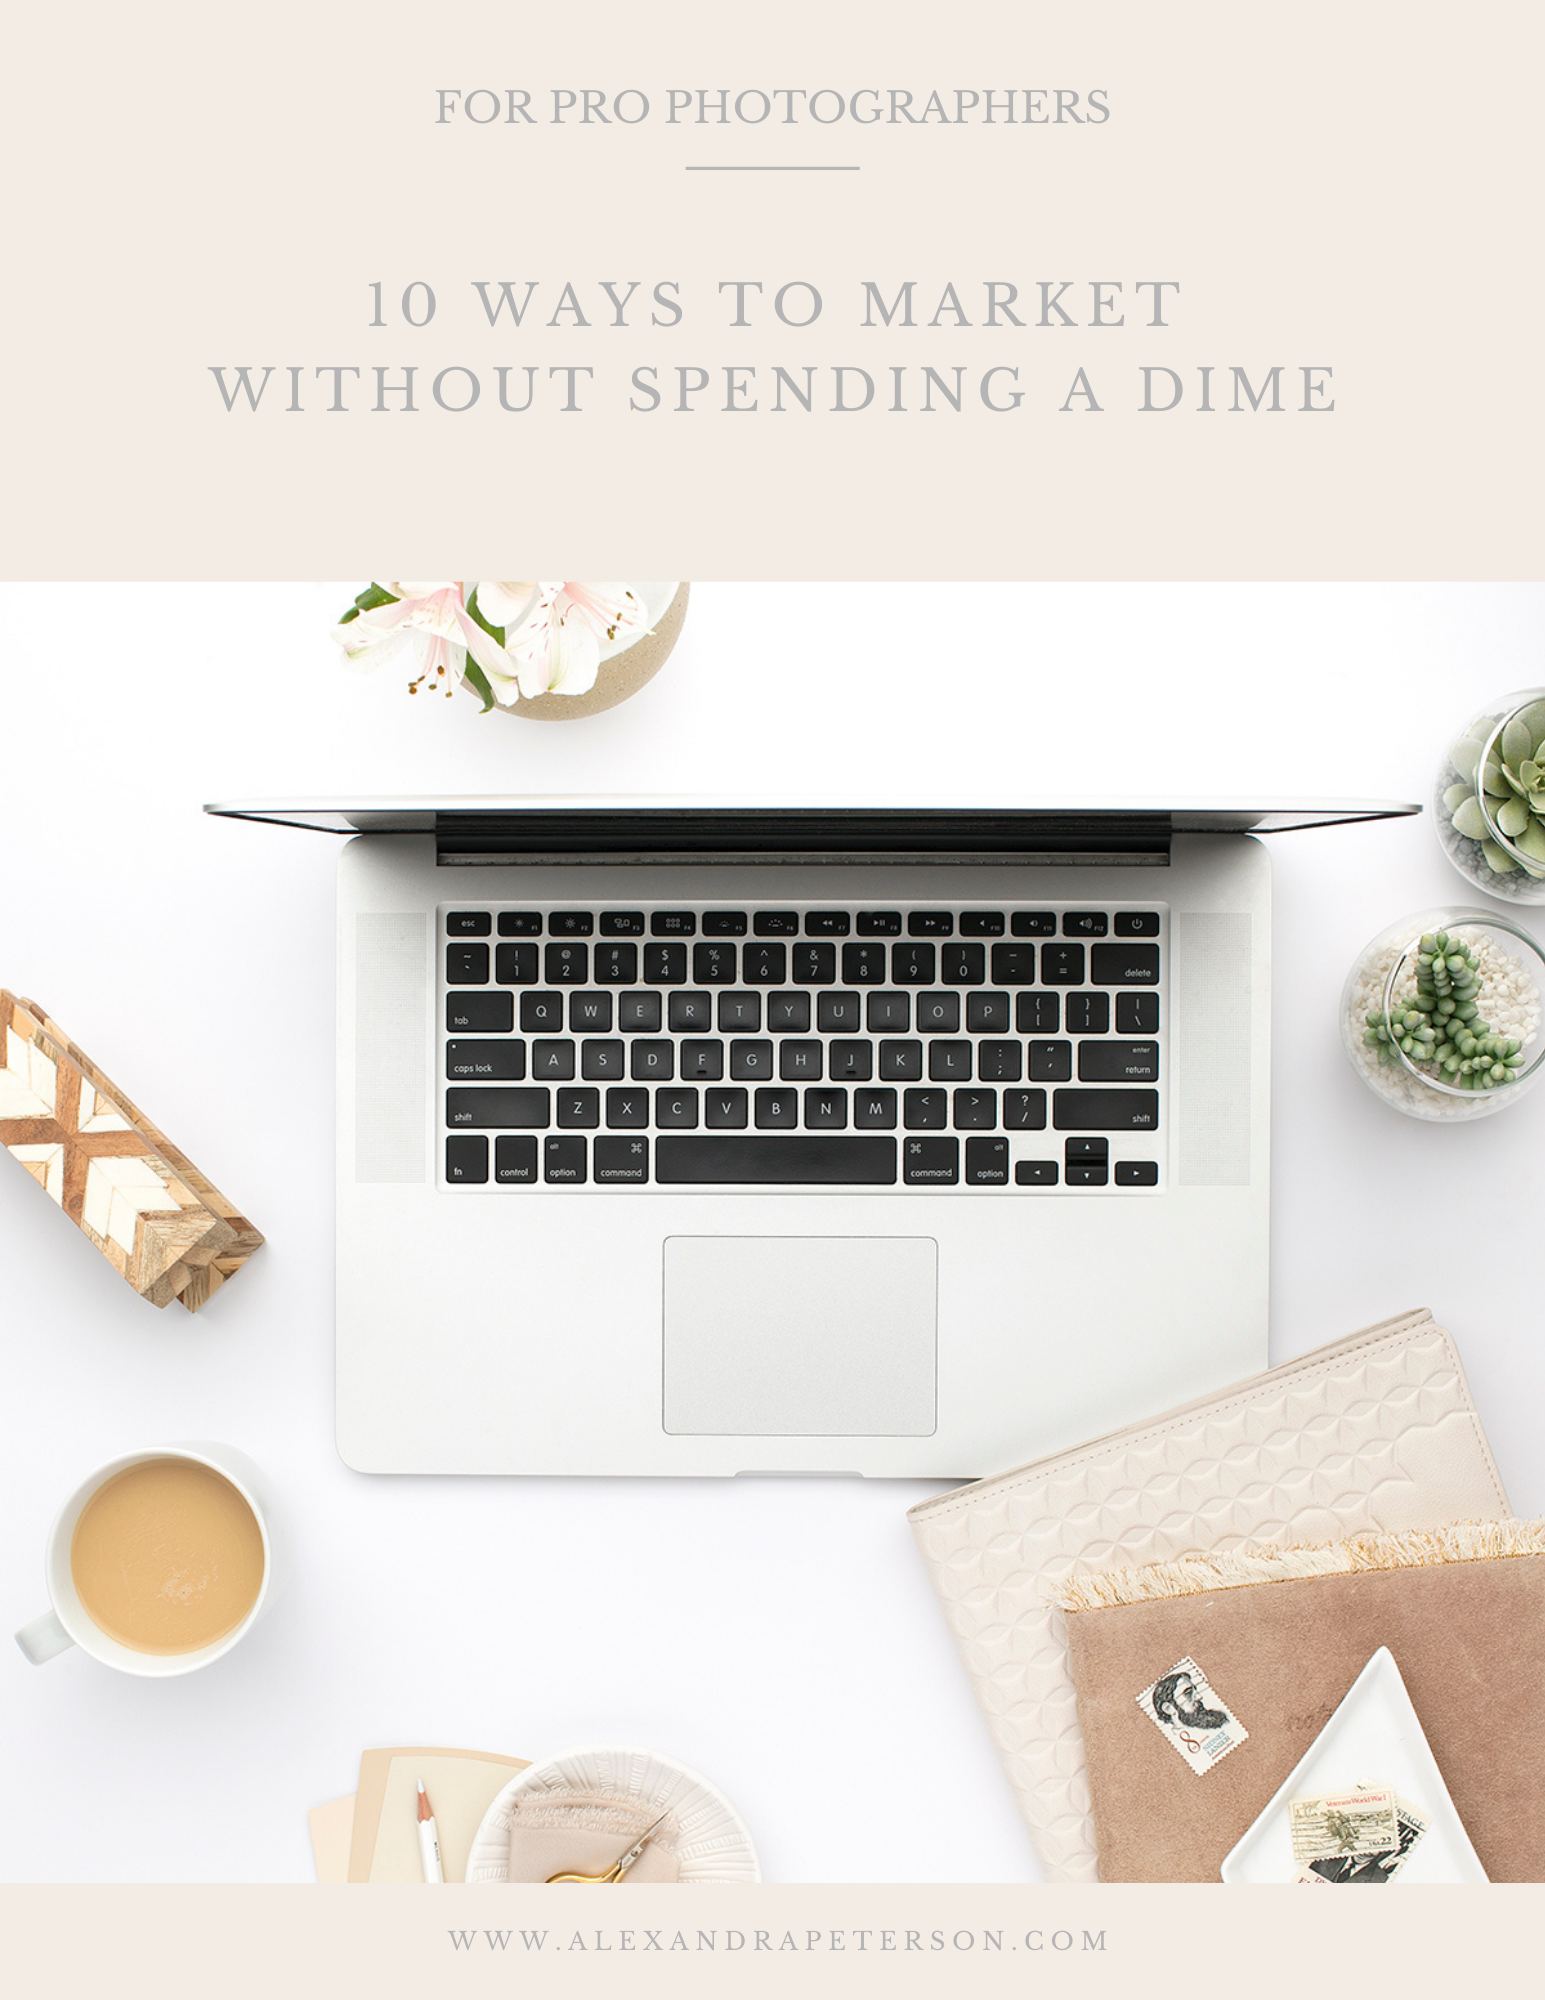 10 Ways to Market Without Spending a Dime by Alexandra Peterson